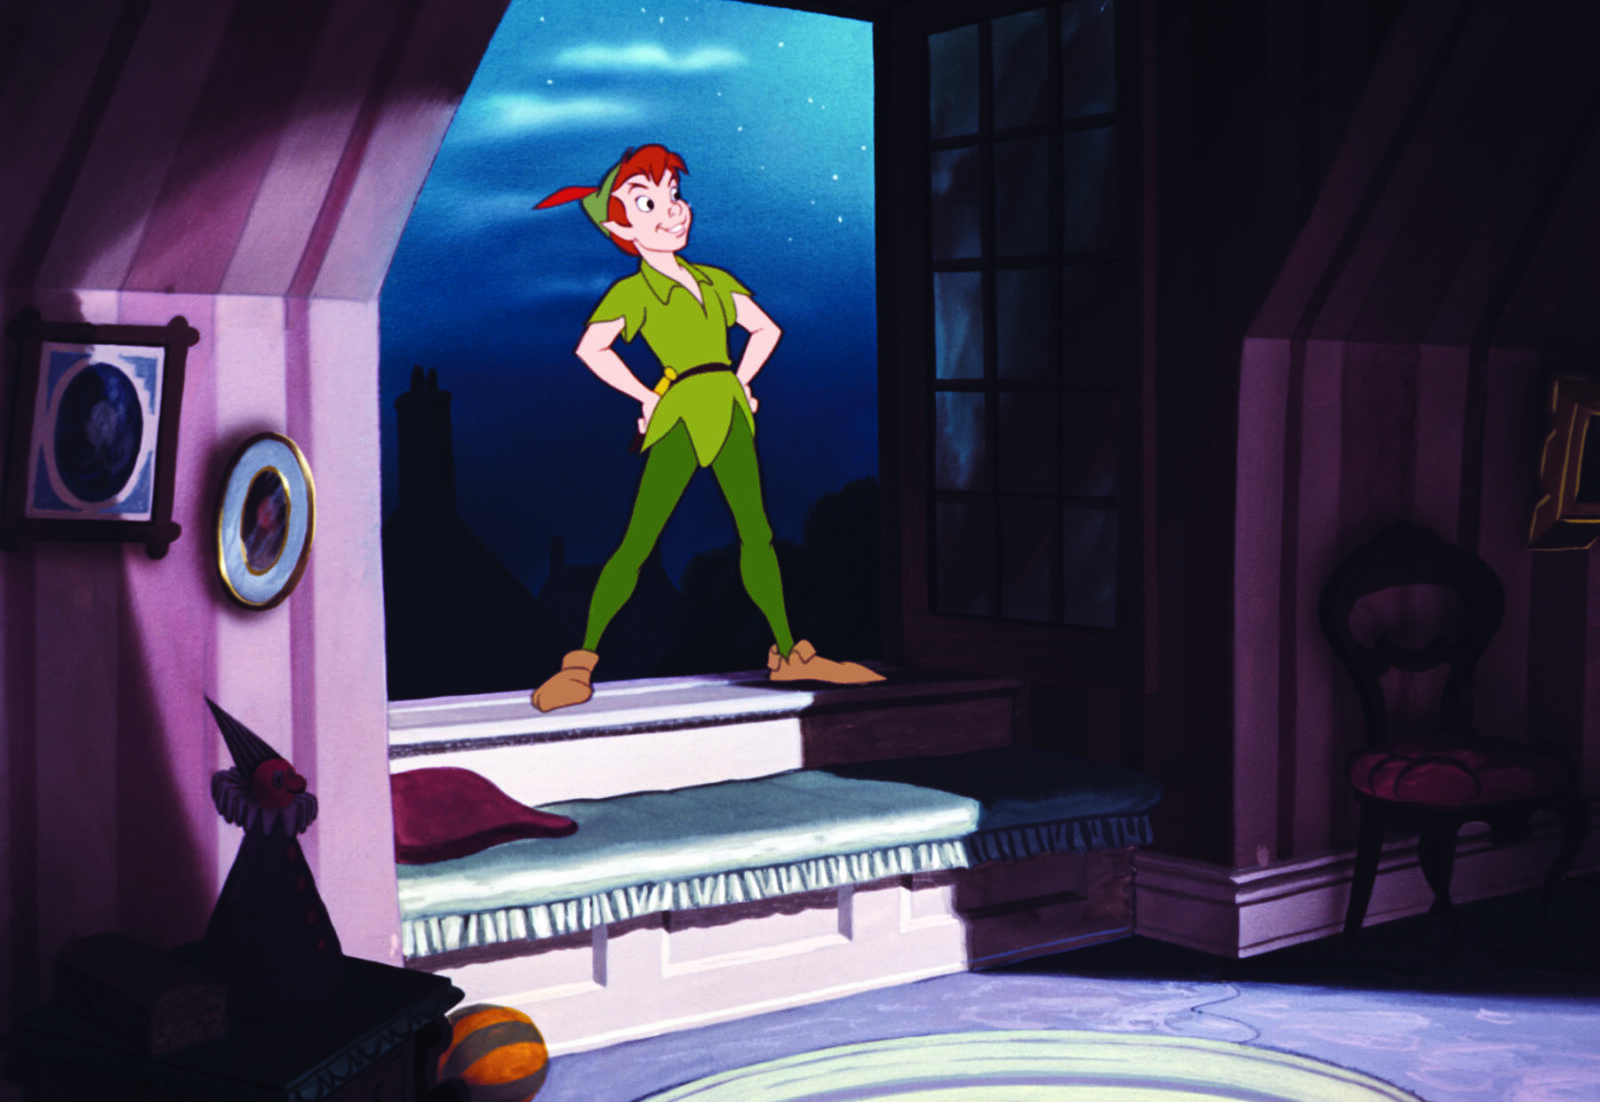 Image from "Peter Pan". Courtesy of Disney